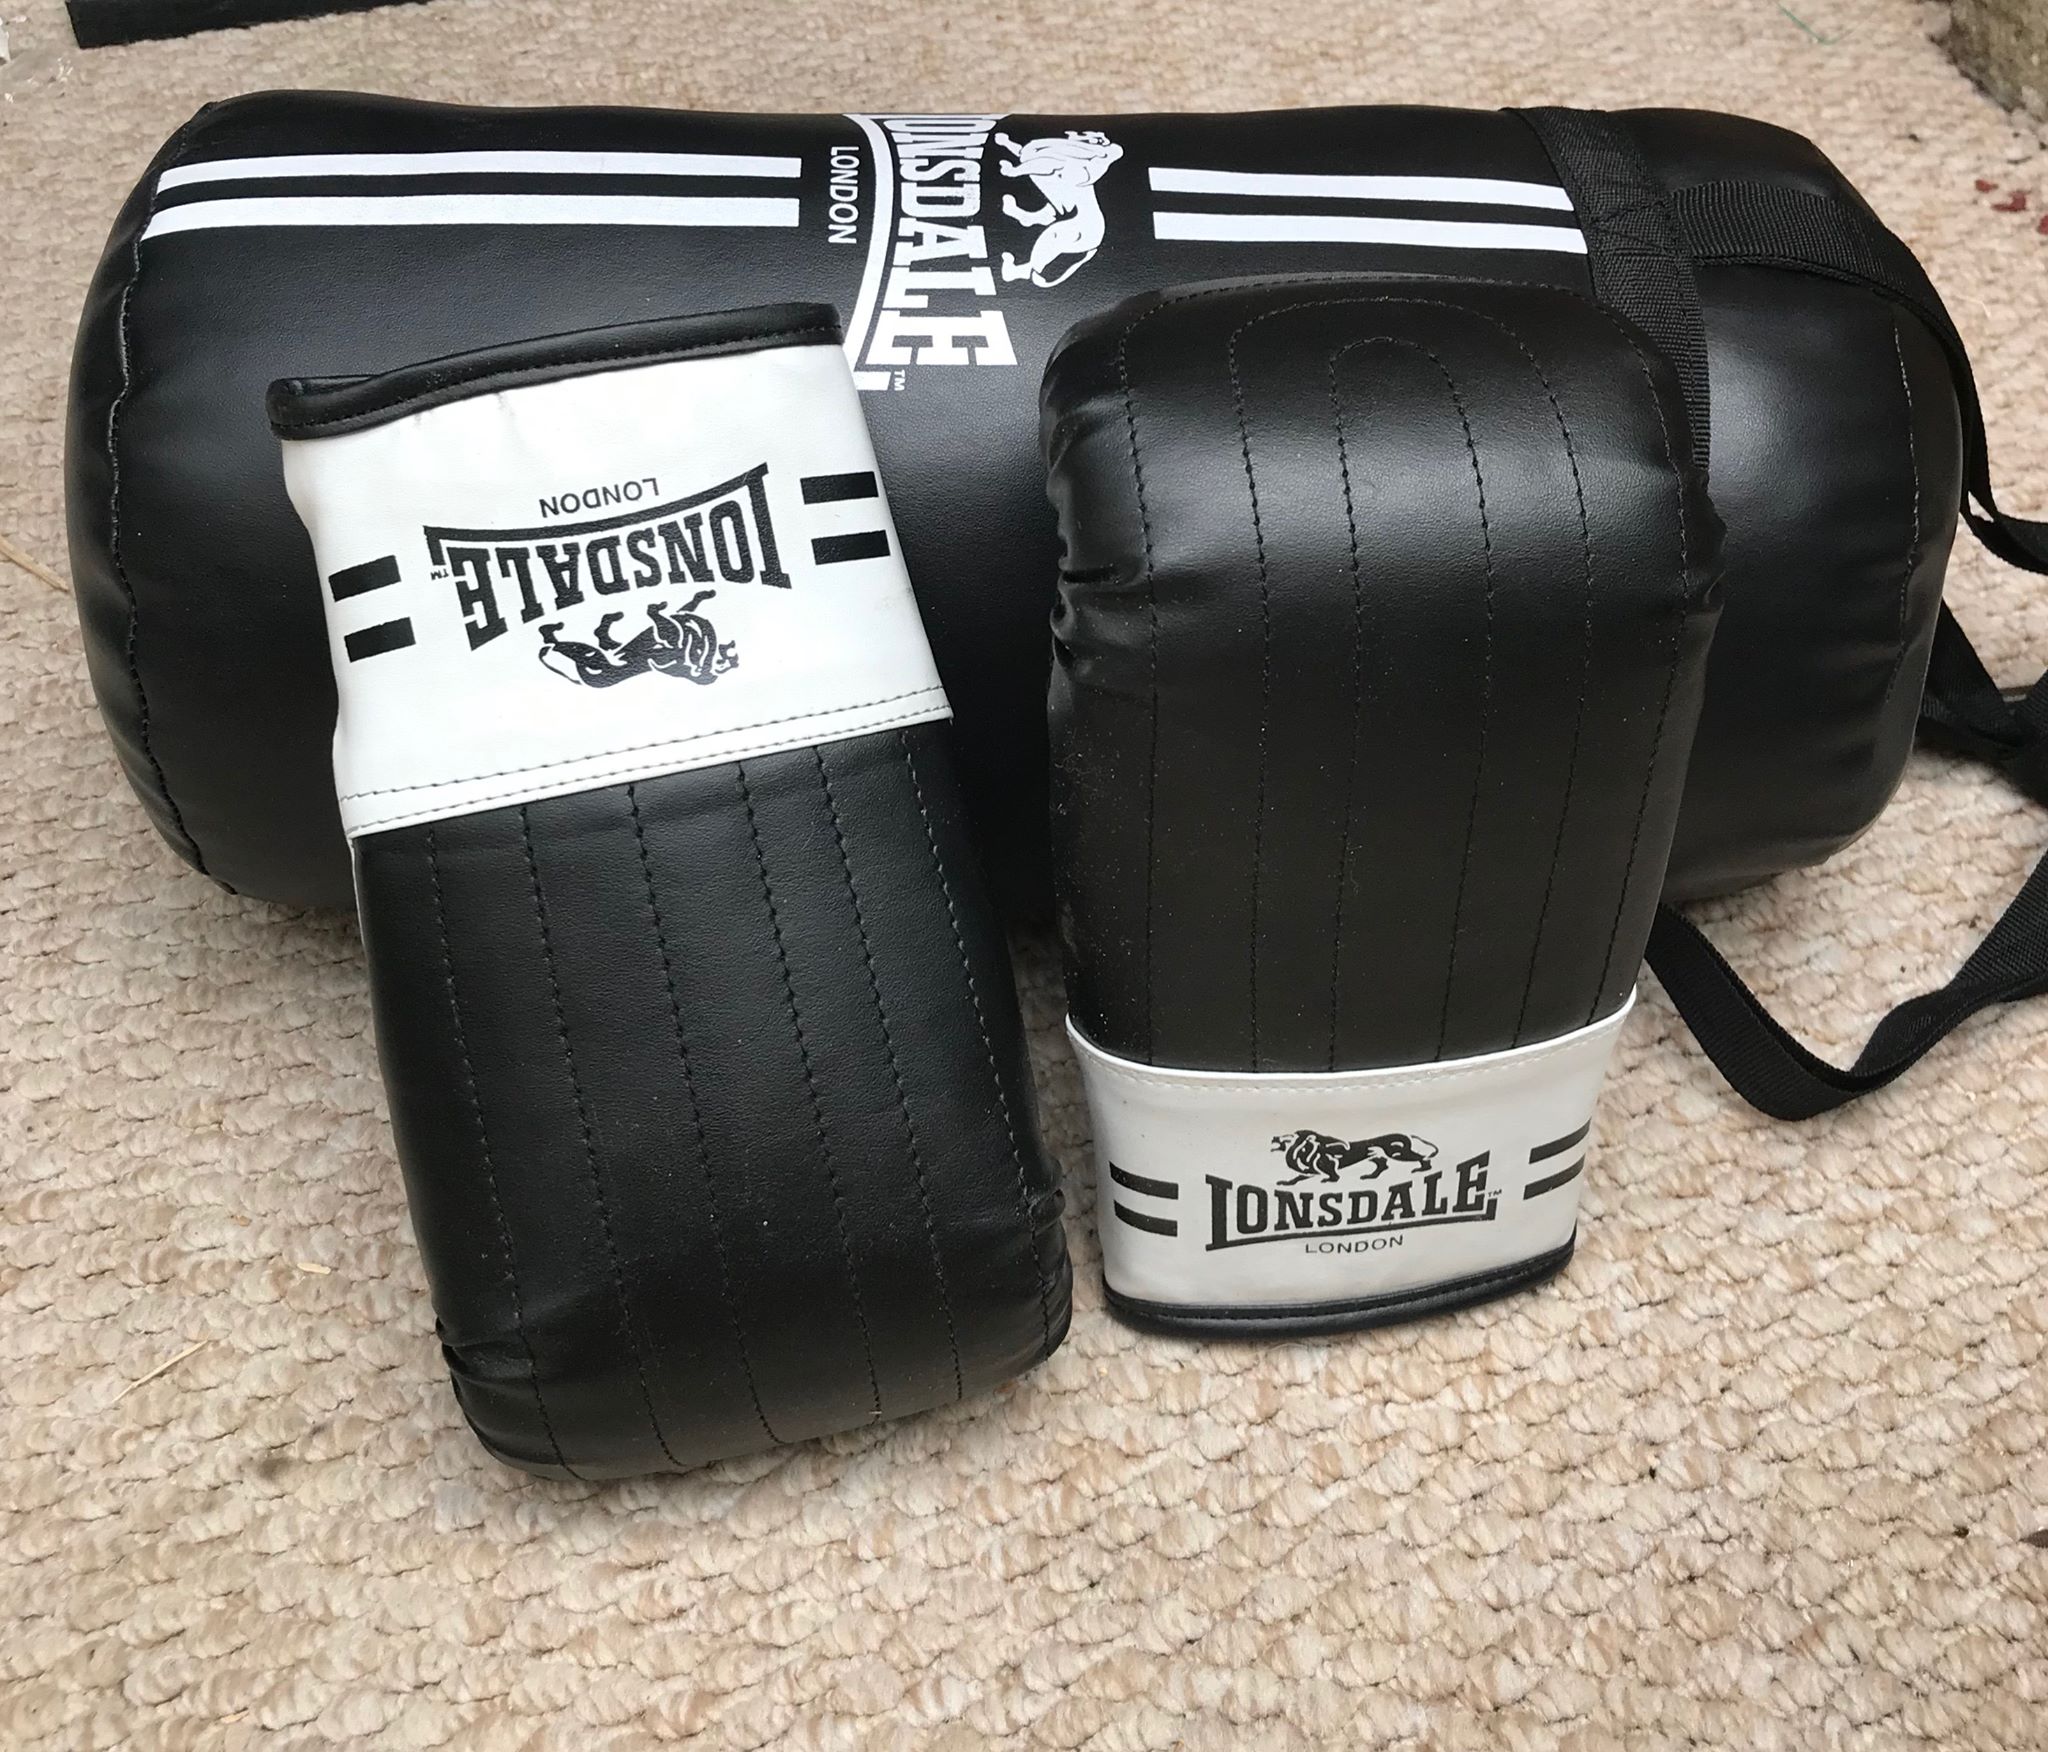 A set of black boxing gloves on the floor.